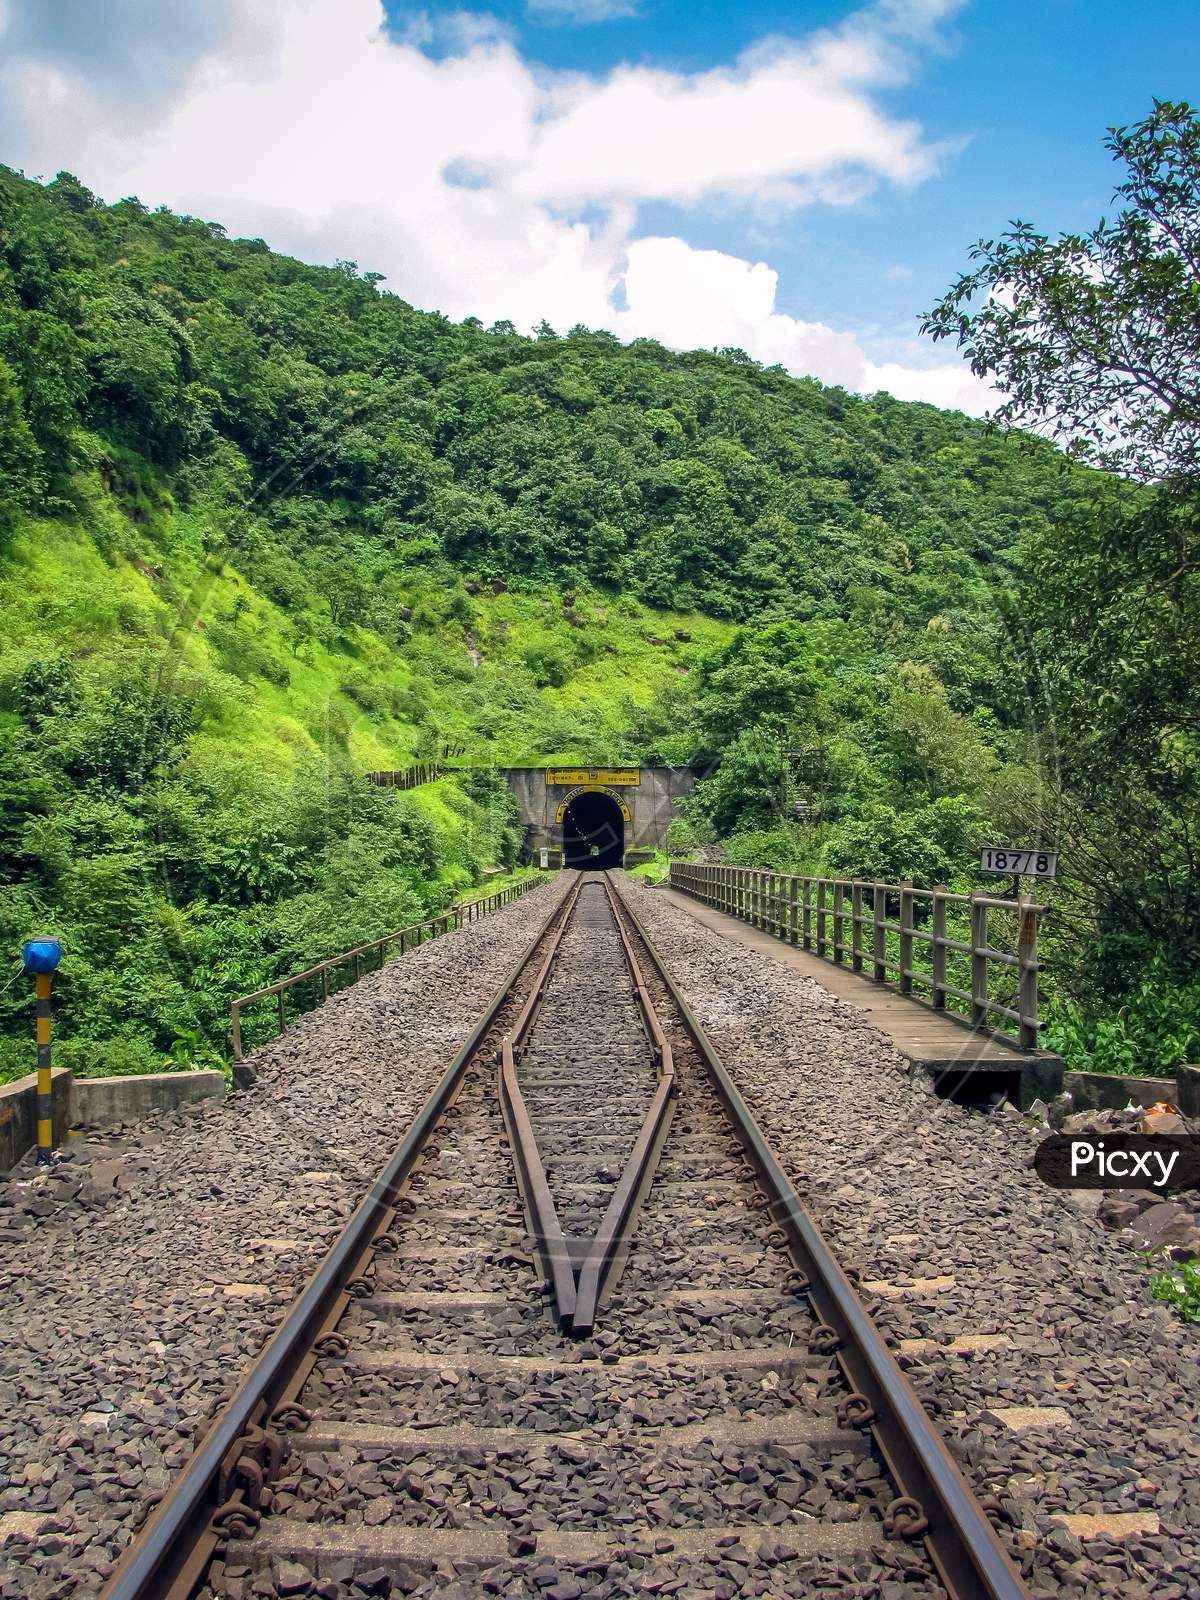 Photo Of A Railway Track Passing Through A Tunnel Cut Through A Hill Full Of Green Plants.